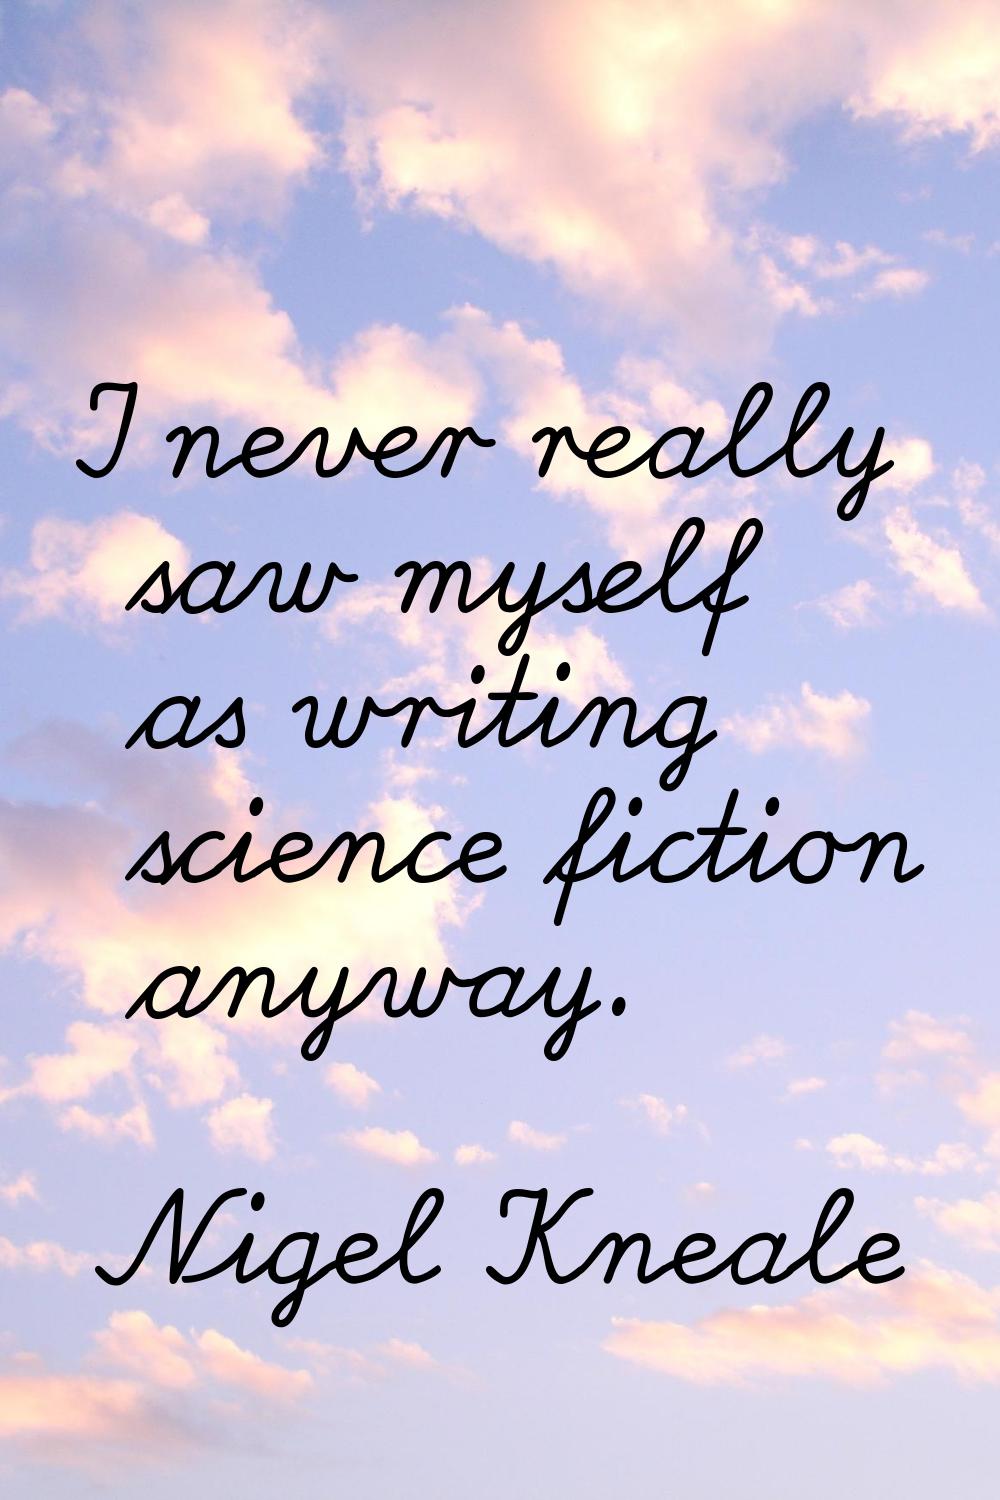 I never really saw myself as writing science fiction anyway.